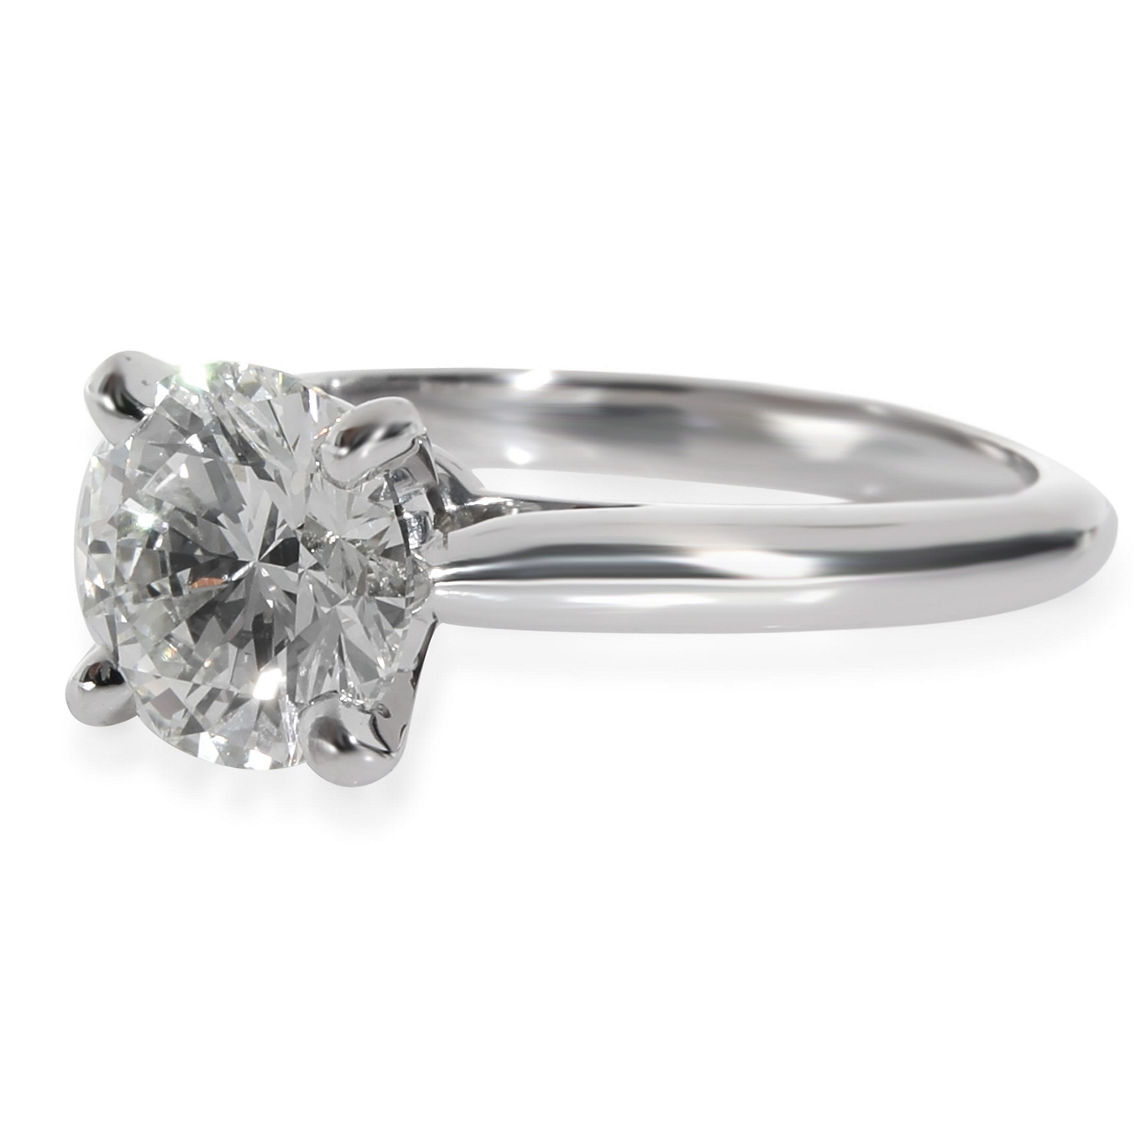 Cartier 1895 Diamond Solitaire Engagement Ring in Platinum 1.8 CTW Pre-Owned - Image 2 of 3